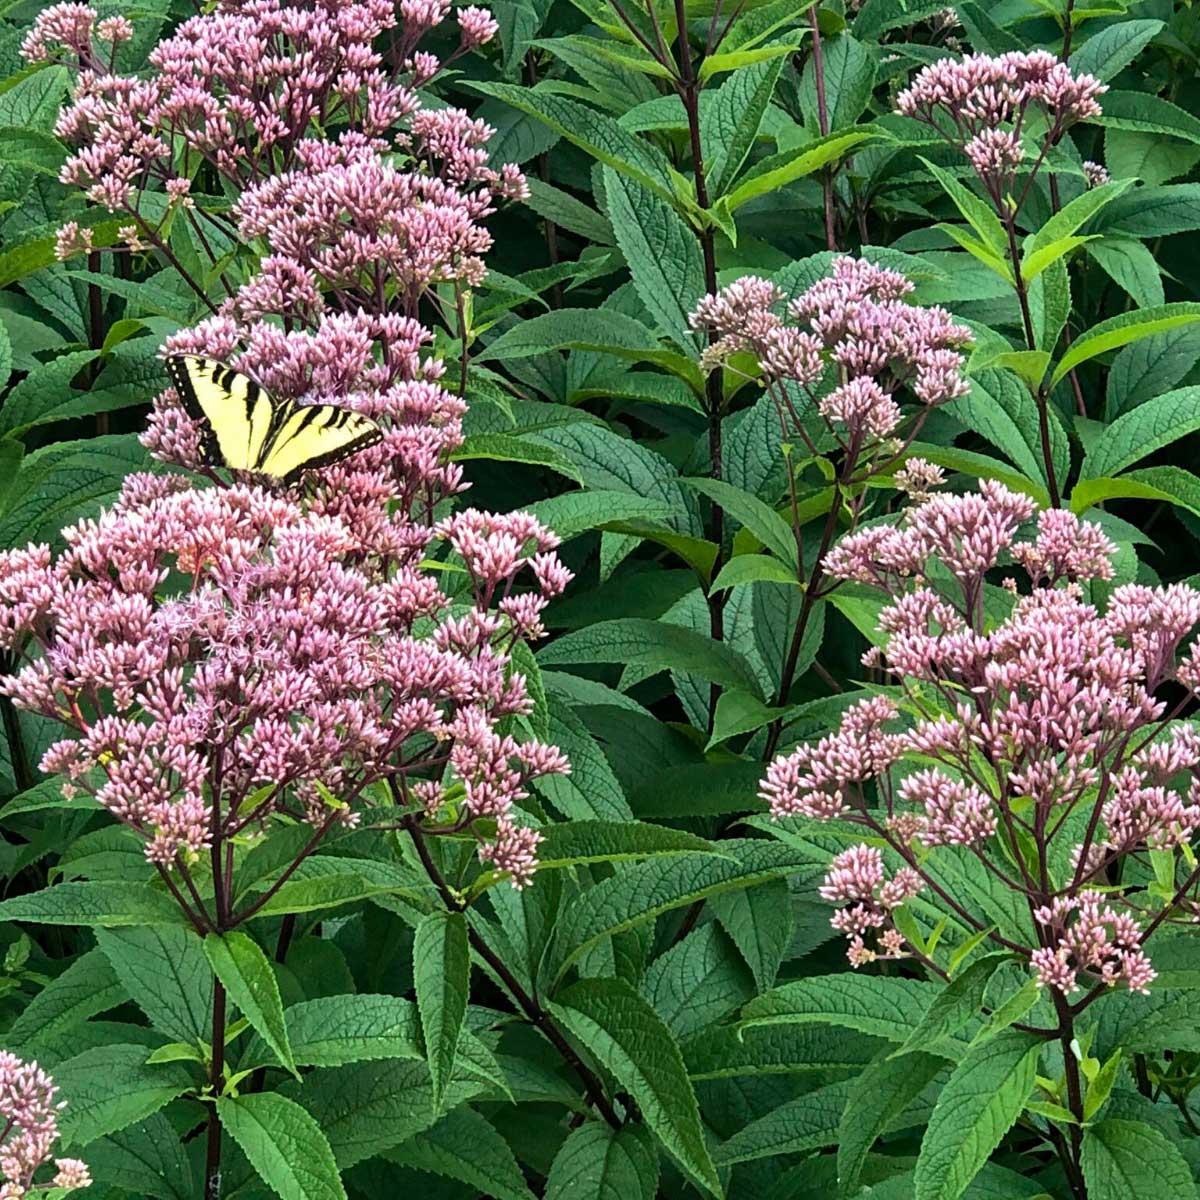 This robust wildflower has multiples of sturdy stems with whorls of attractive foliage. In mid-summer, plants are topped with a frothy crown of rounded rosy pink flower clusters. The vanilla scented blooms are frequented by butterflies.